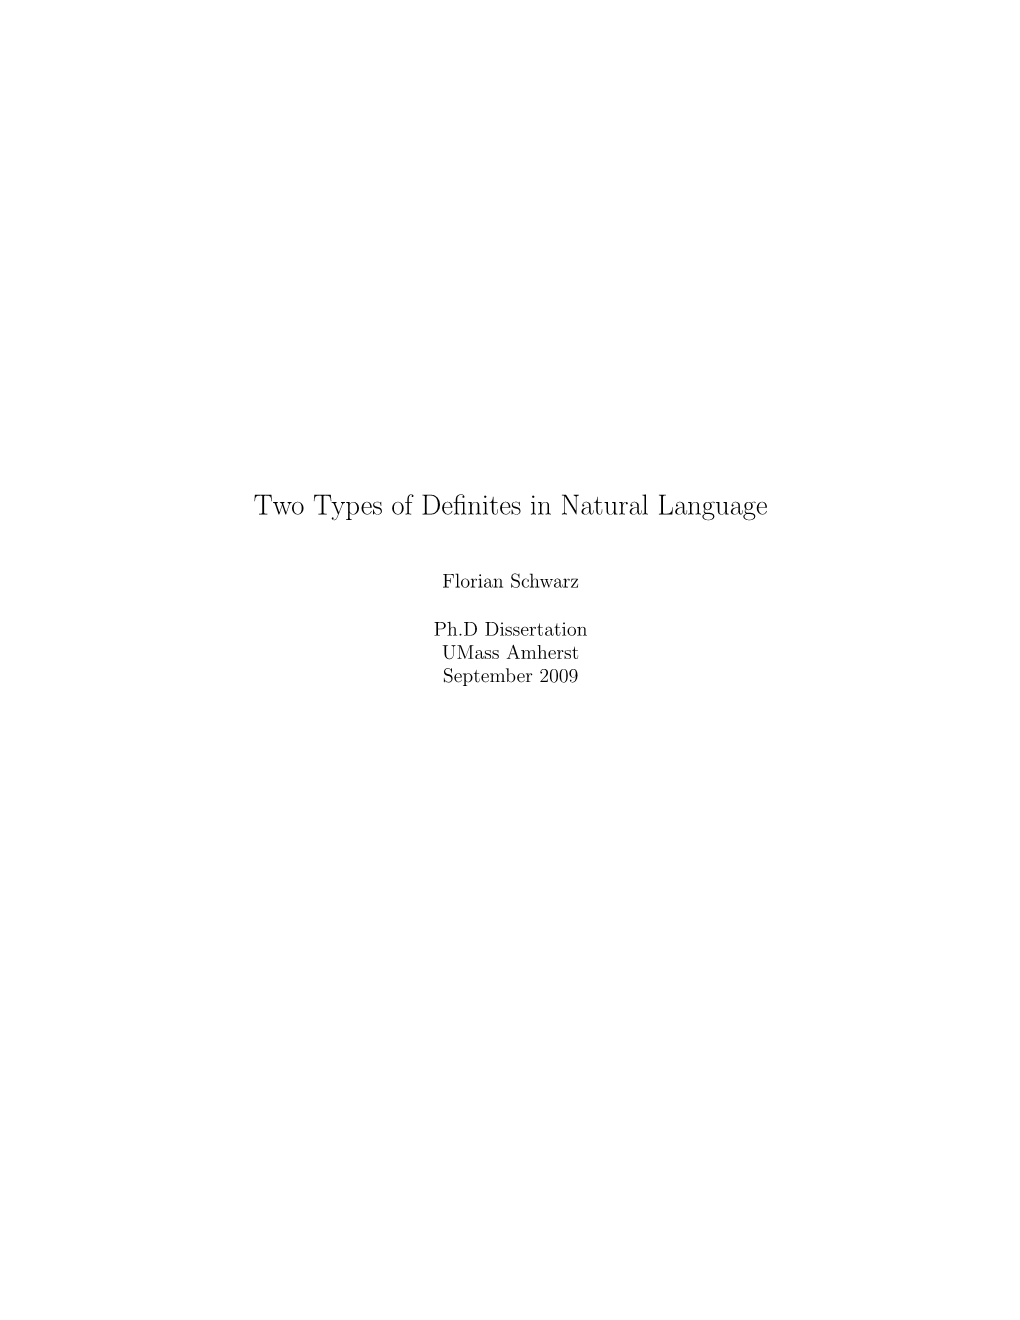 Two Types of Definites in Natural Language